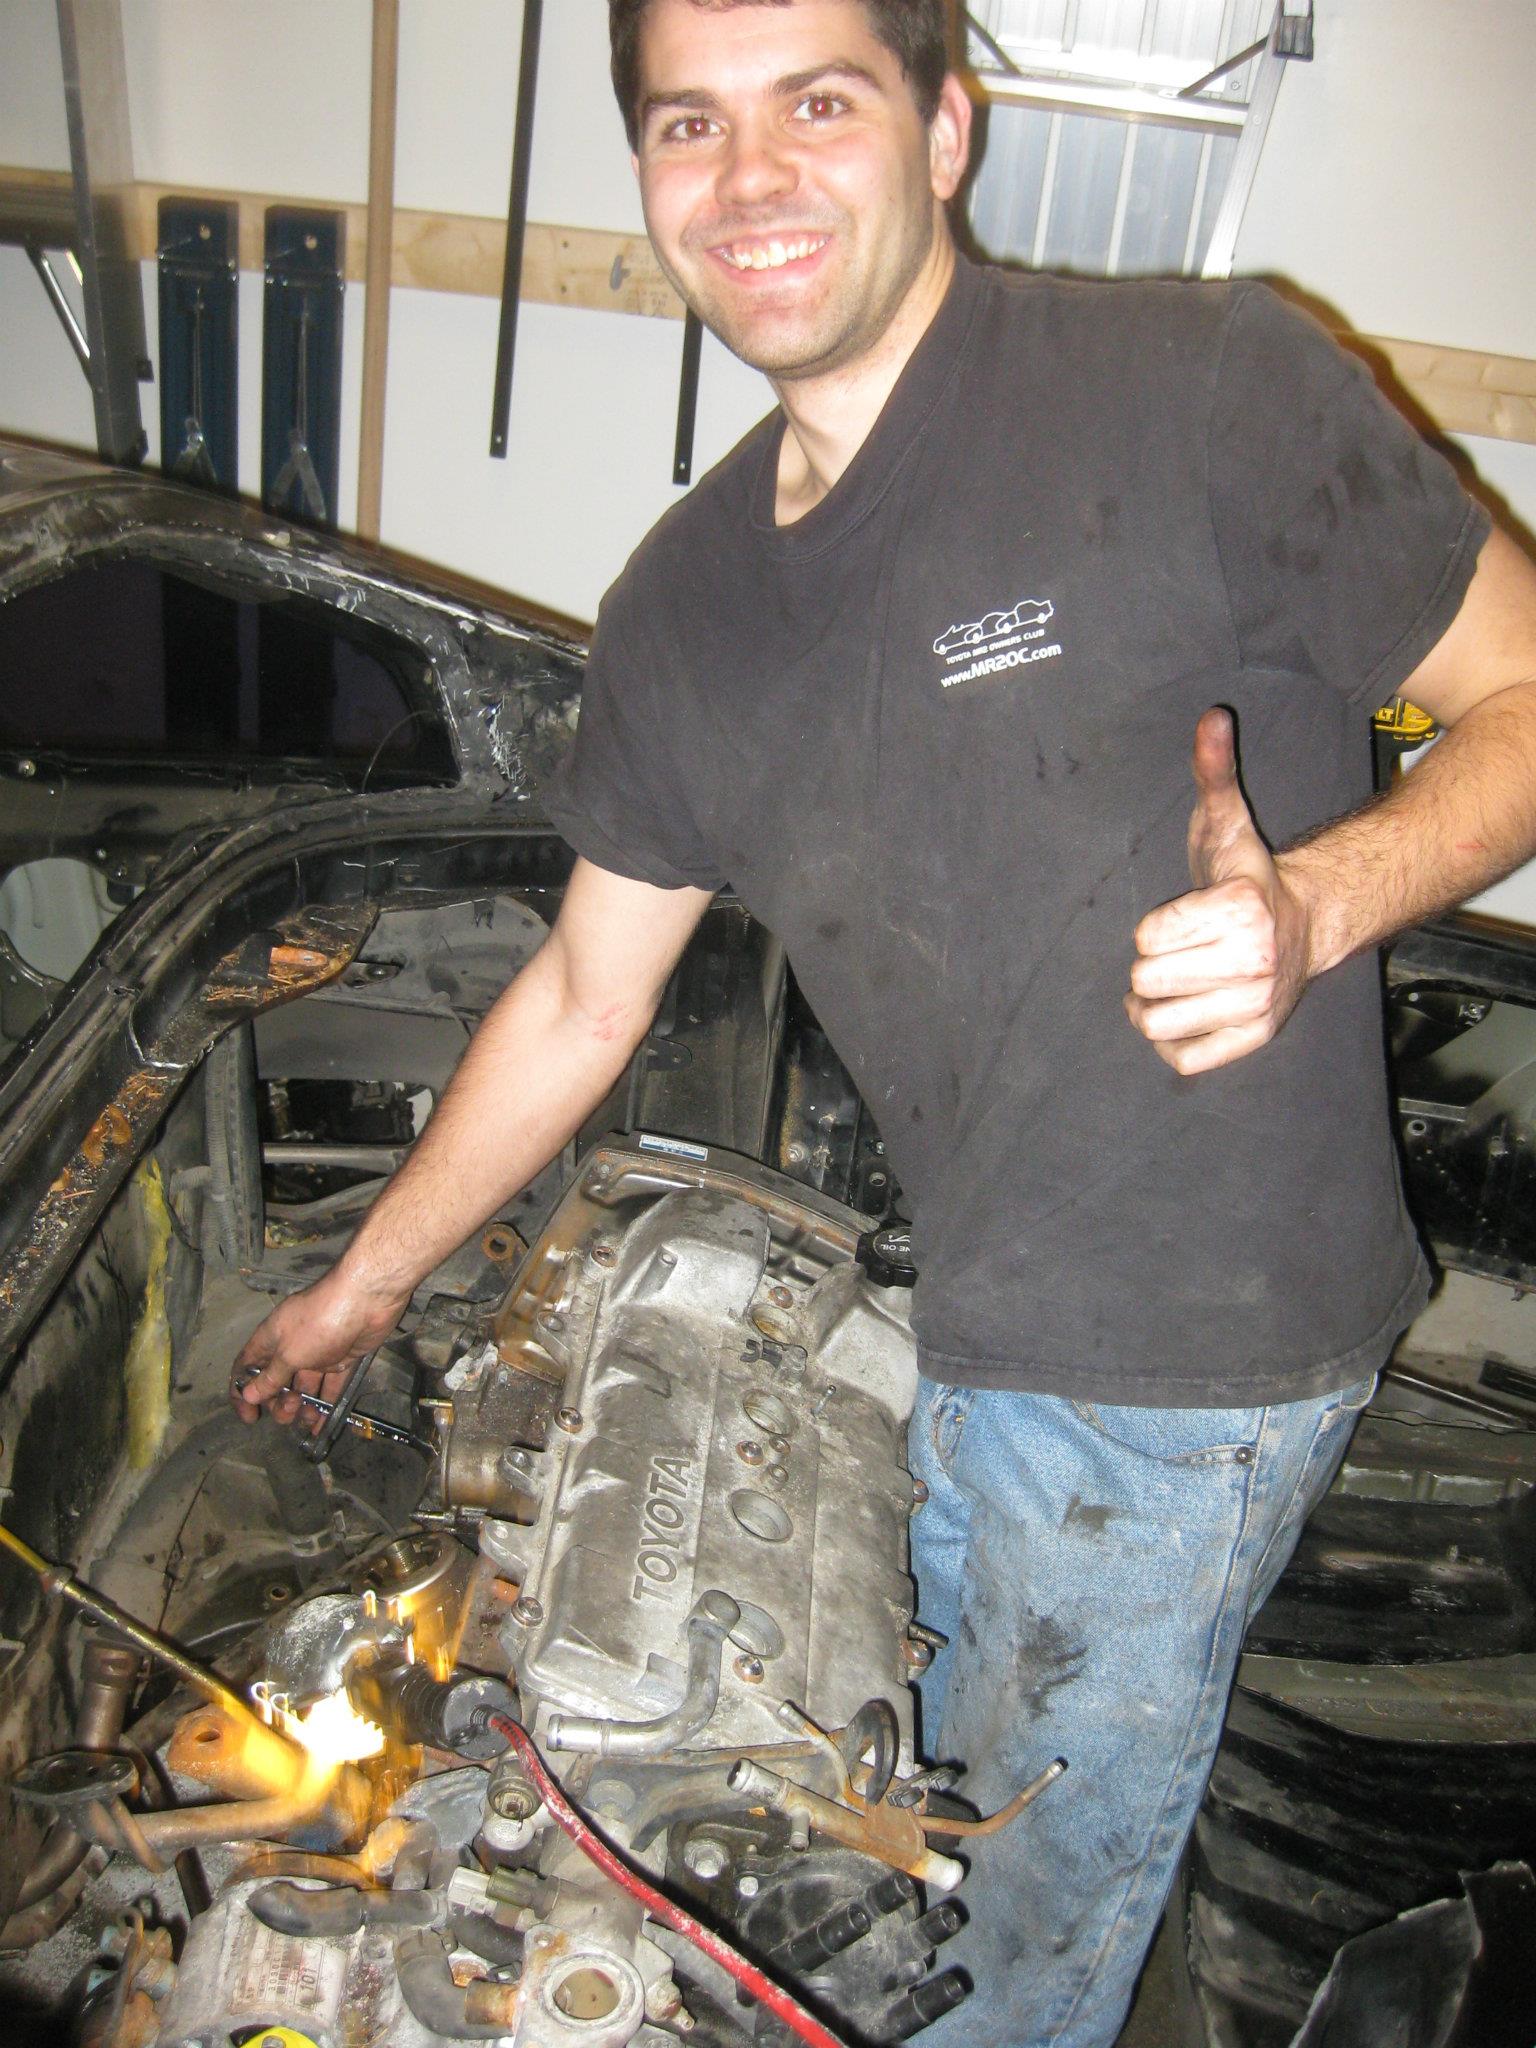 A picture of Bill working on a car